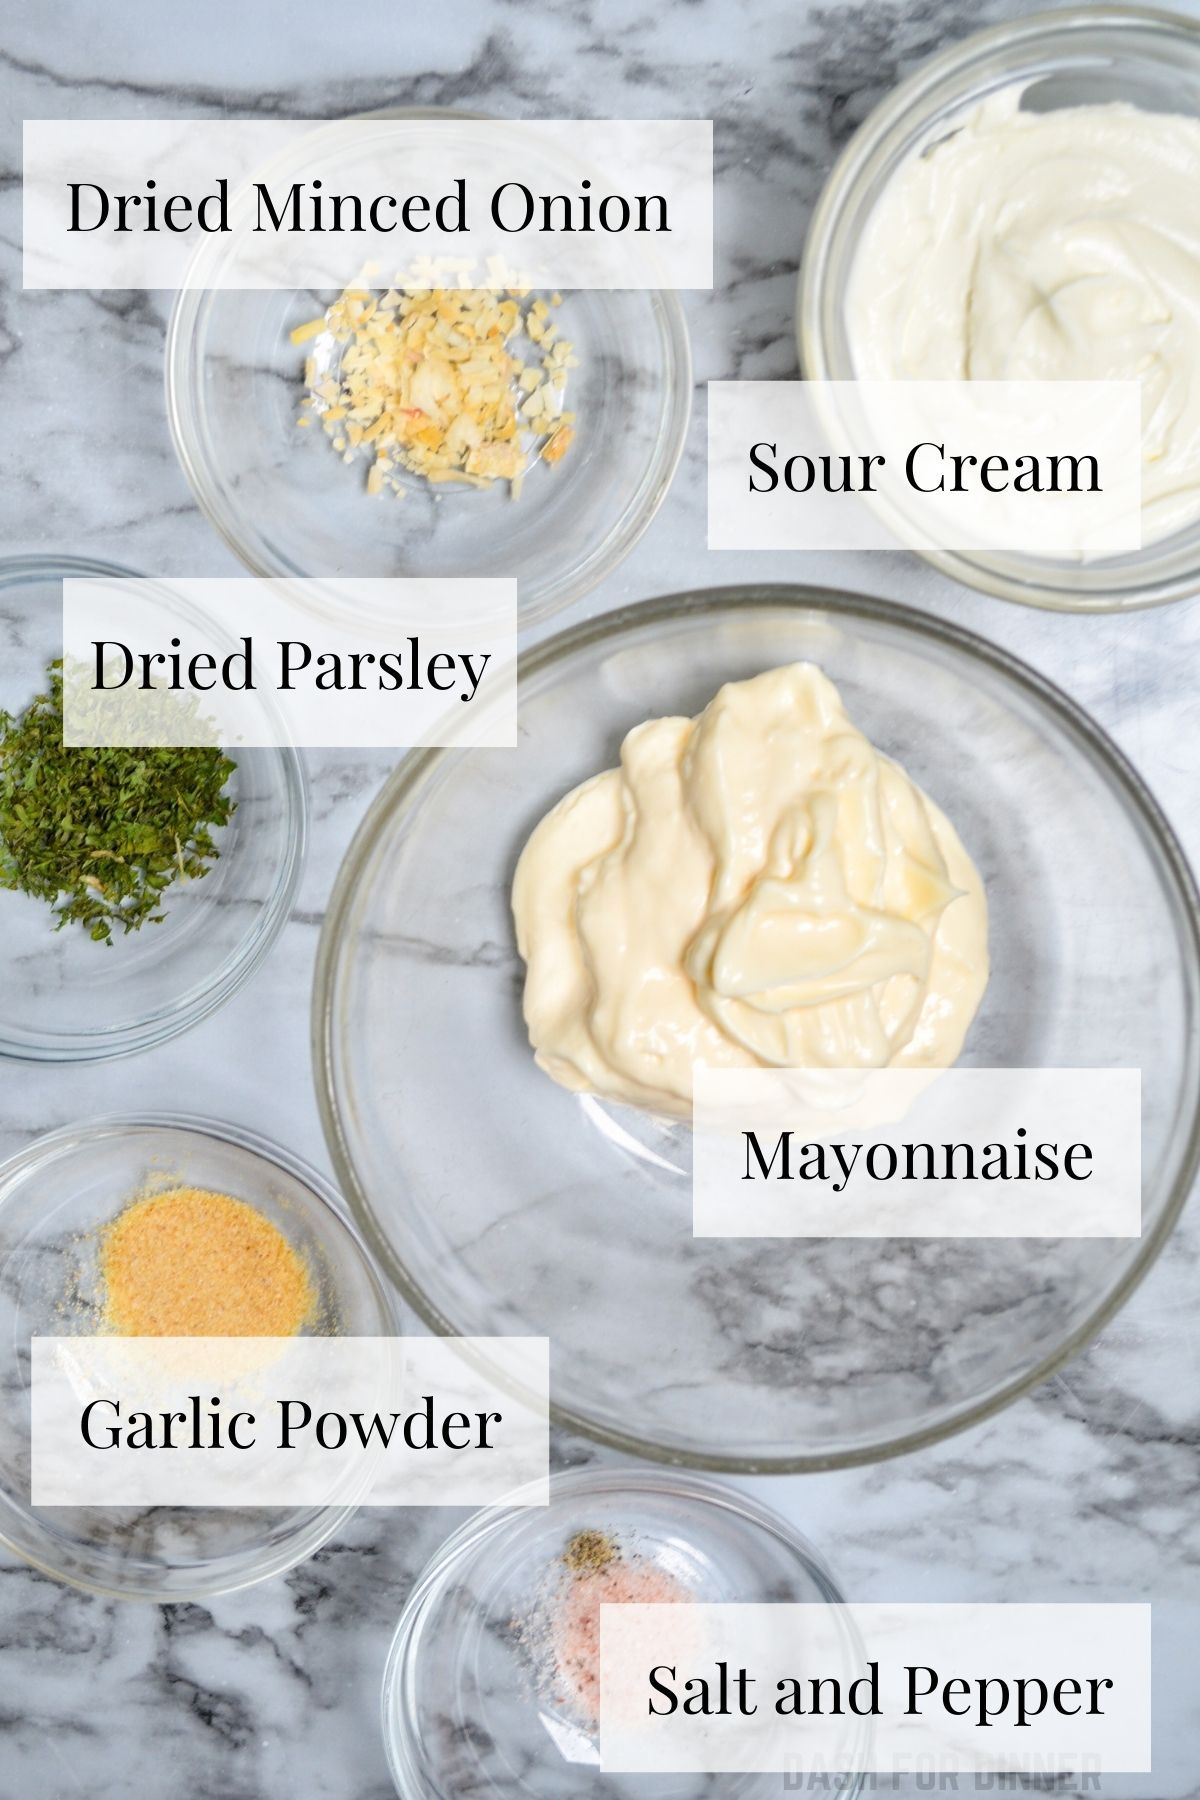 The ingredients needed to make ranch dip: mayonnaise, sour cream, dried minced onion, dried parsley, garlic powder, salt, and pepper.